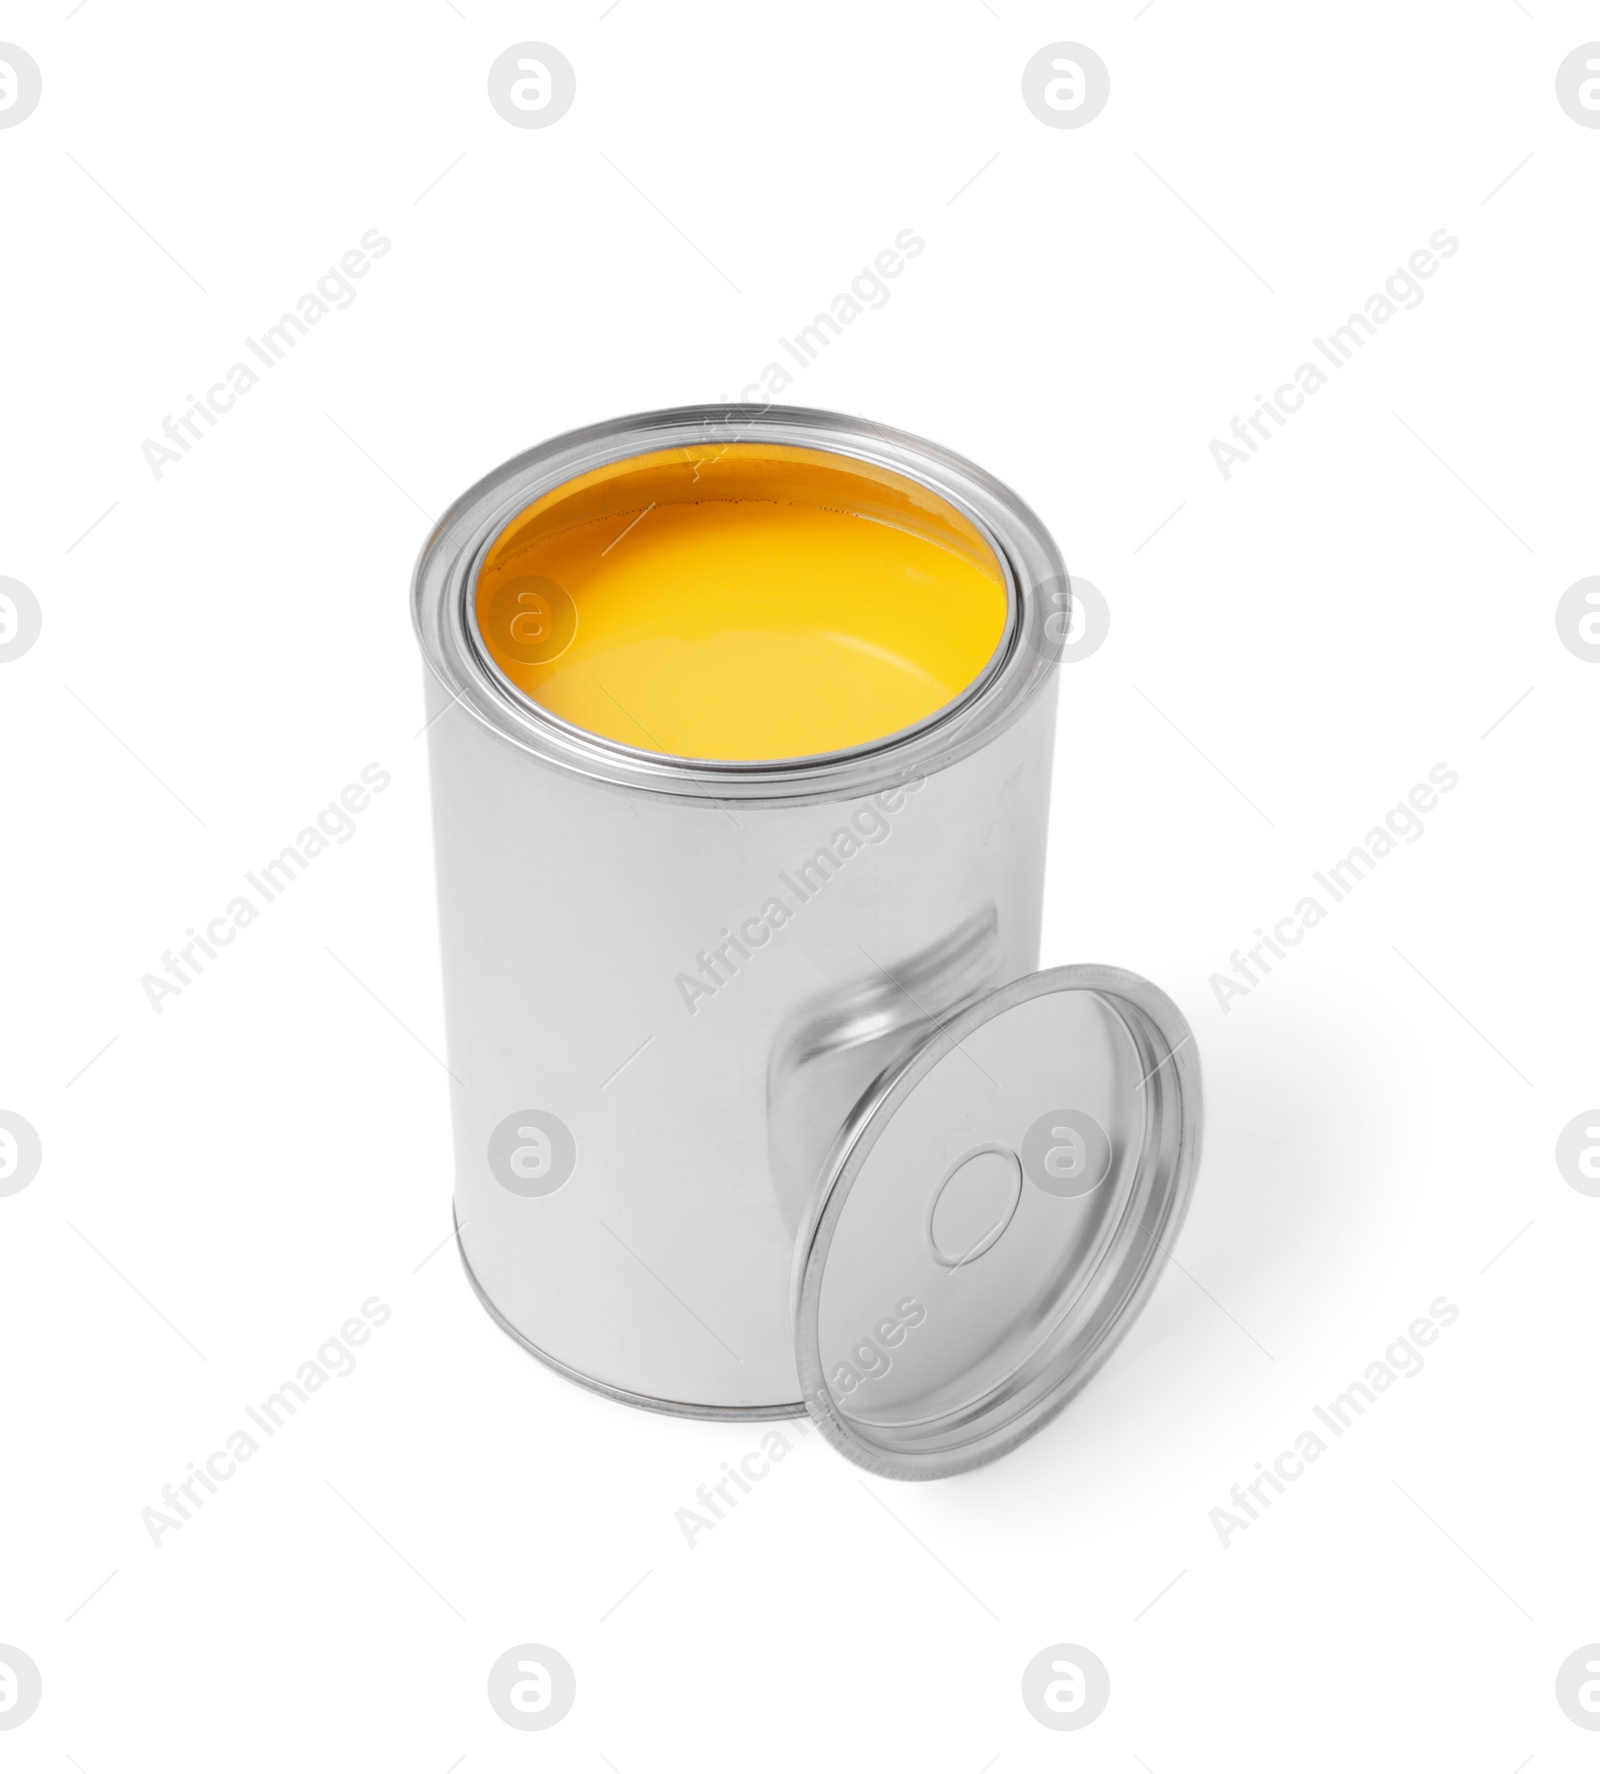 Photo of Can with yellow paint on white background